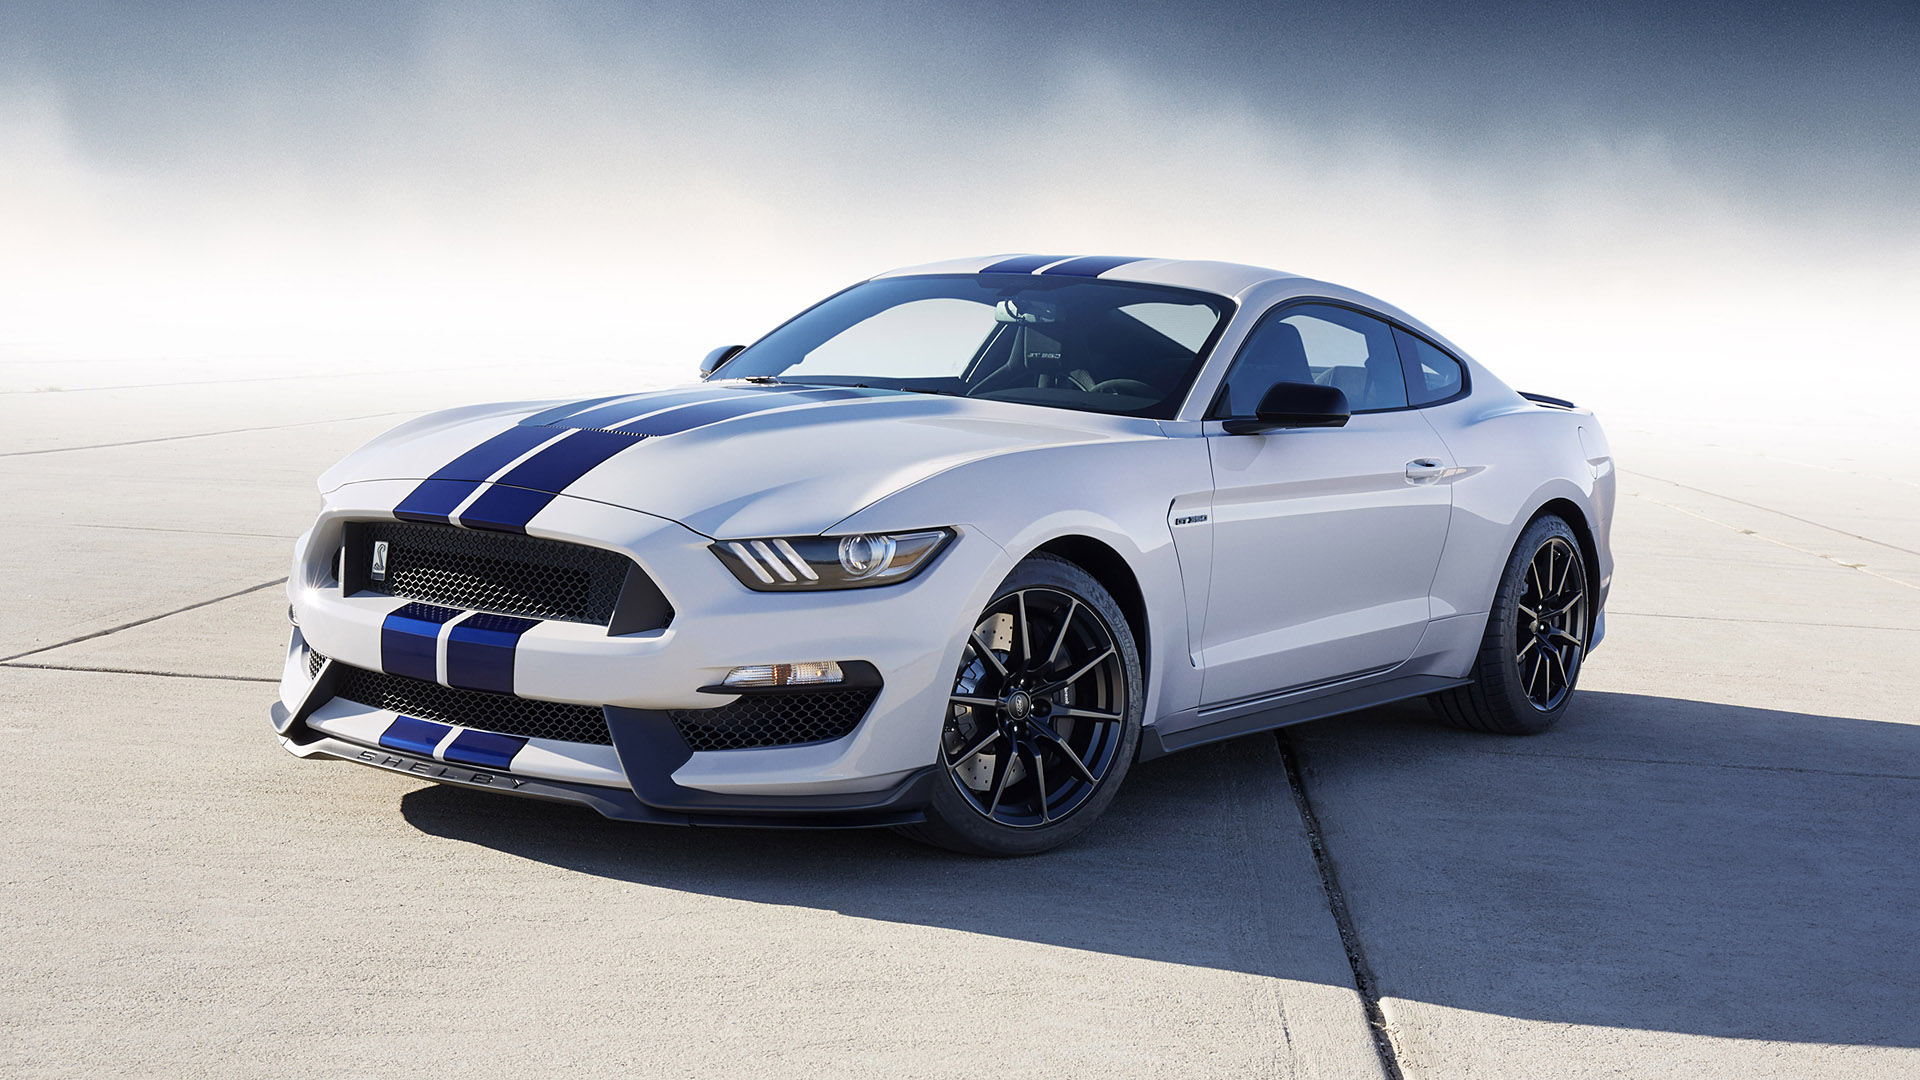 Ford Shelby Mustang Gt350 Wallpaper HD Image Wsupercars